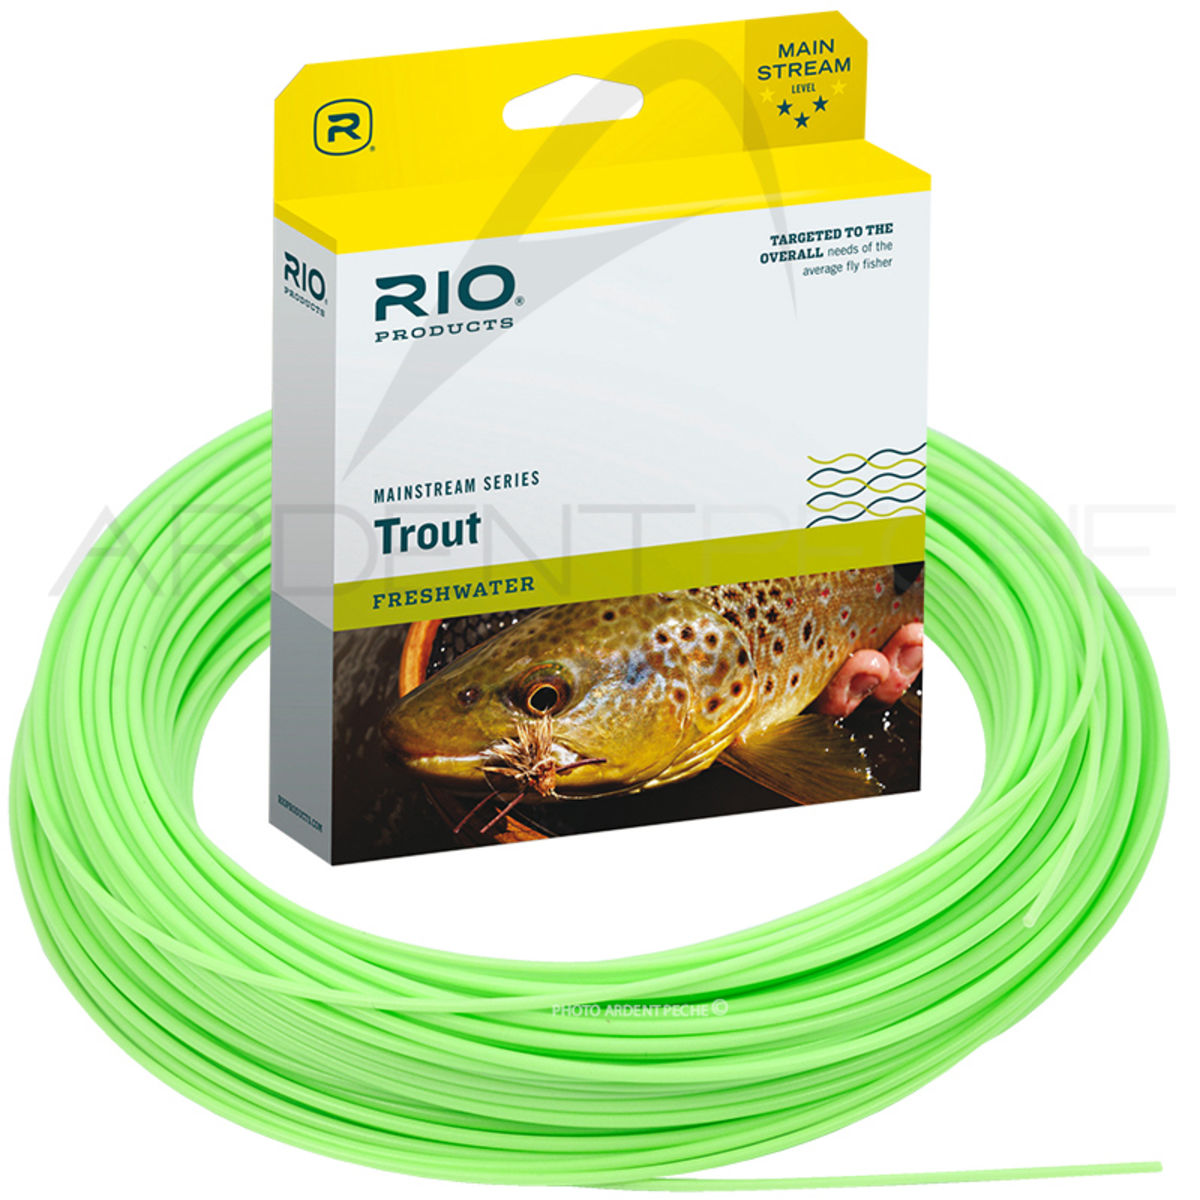 RIO MAINSTREAM TROUT WF-5-F #5 WT. WEIGHT FORWARD FLOATING FLY FISHING LINE